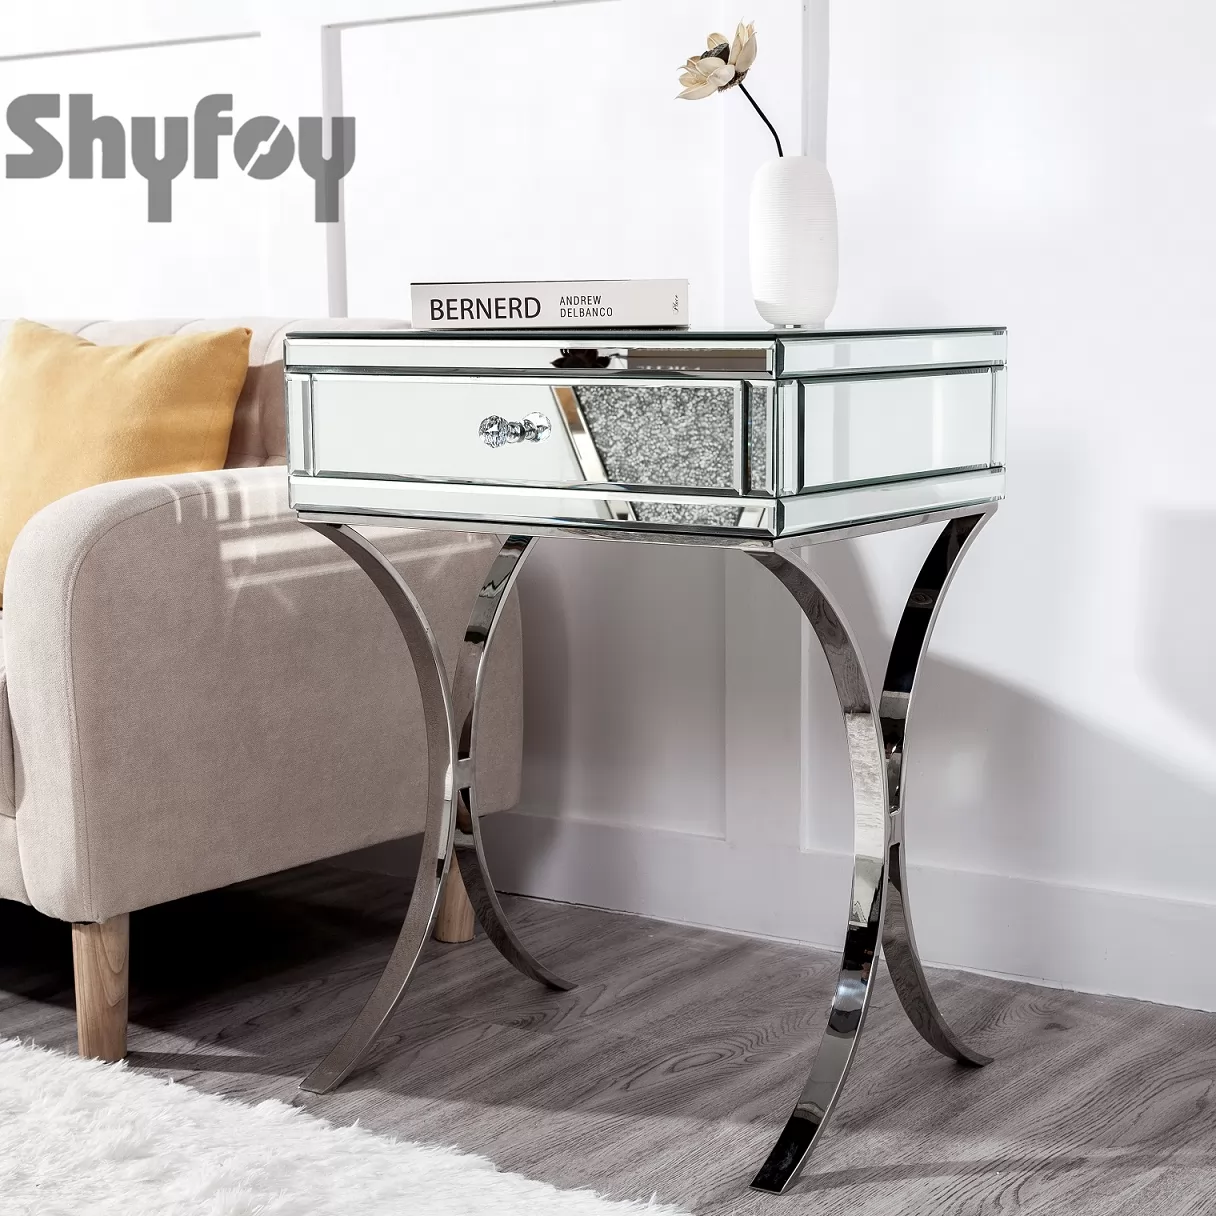 SHYFOY Mirrored Bedside Table with Stainless Steel | Silver Single Drawer Mirrored Night Table | Glass Mirror Nightstand / SF-BT010